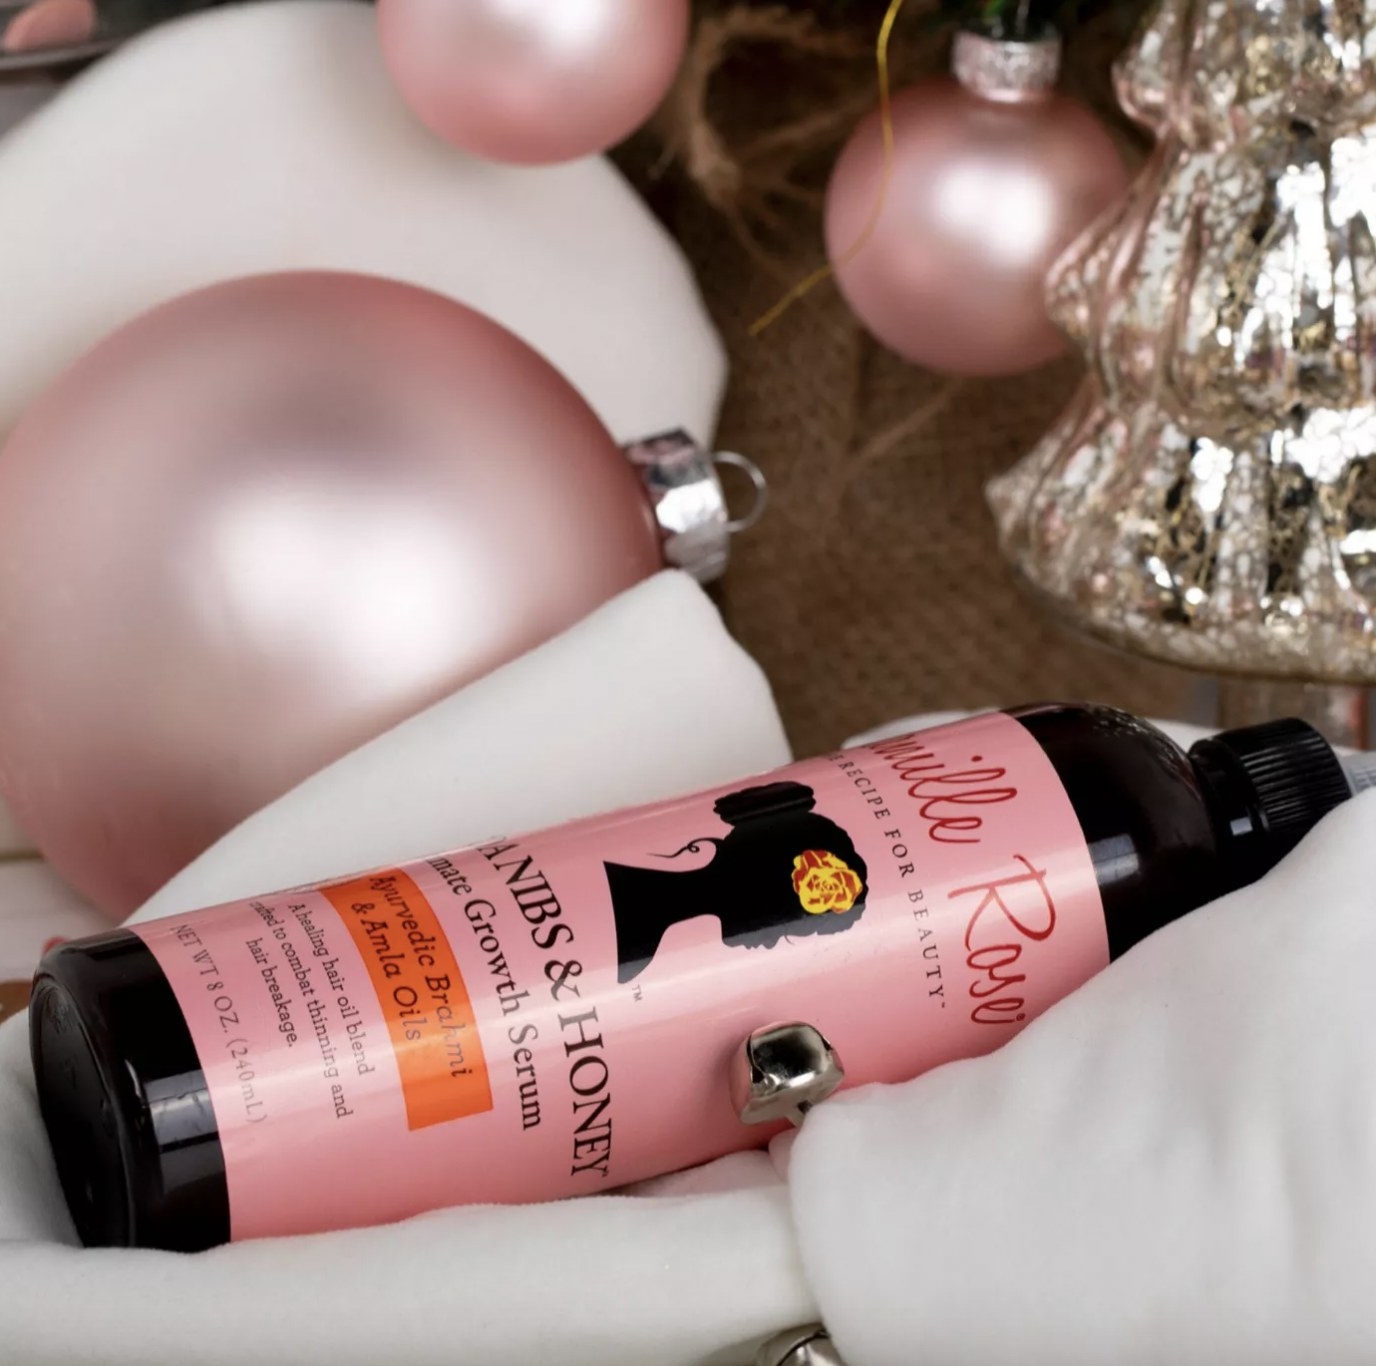 A bottle of hair growth oil and pink and white ornaments